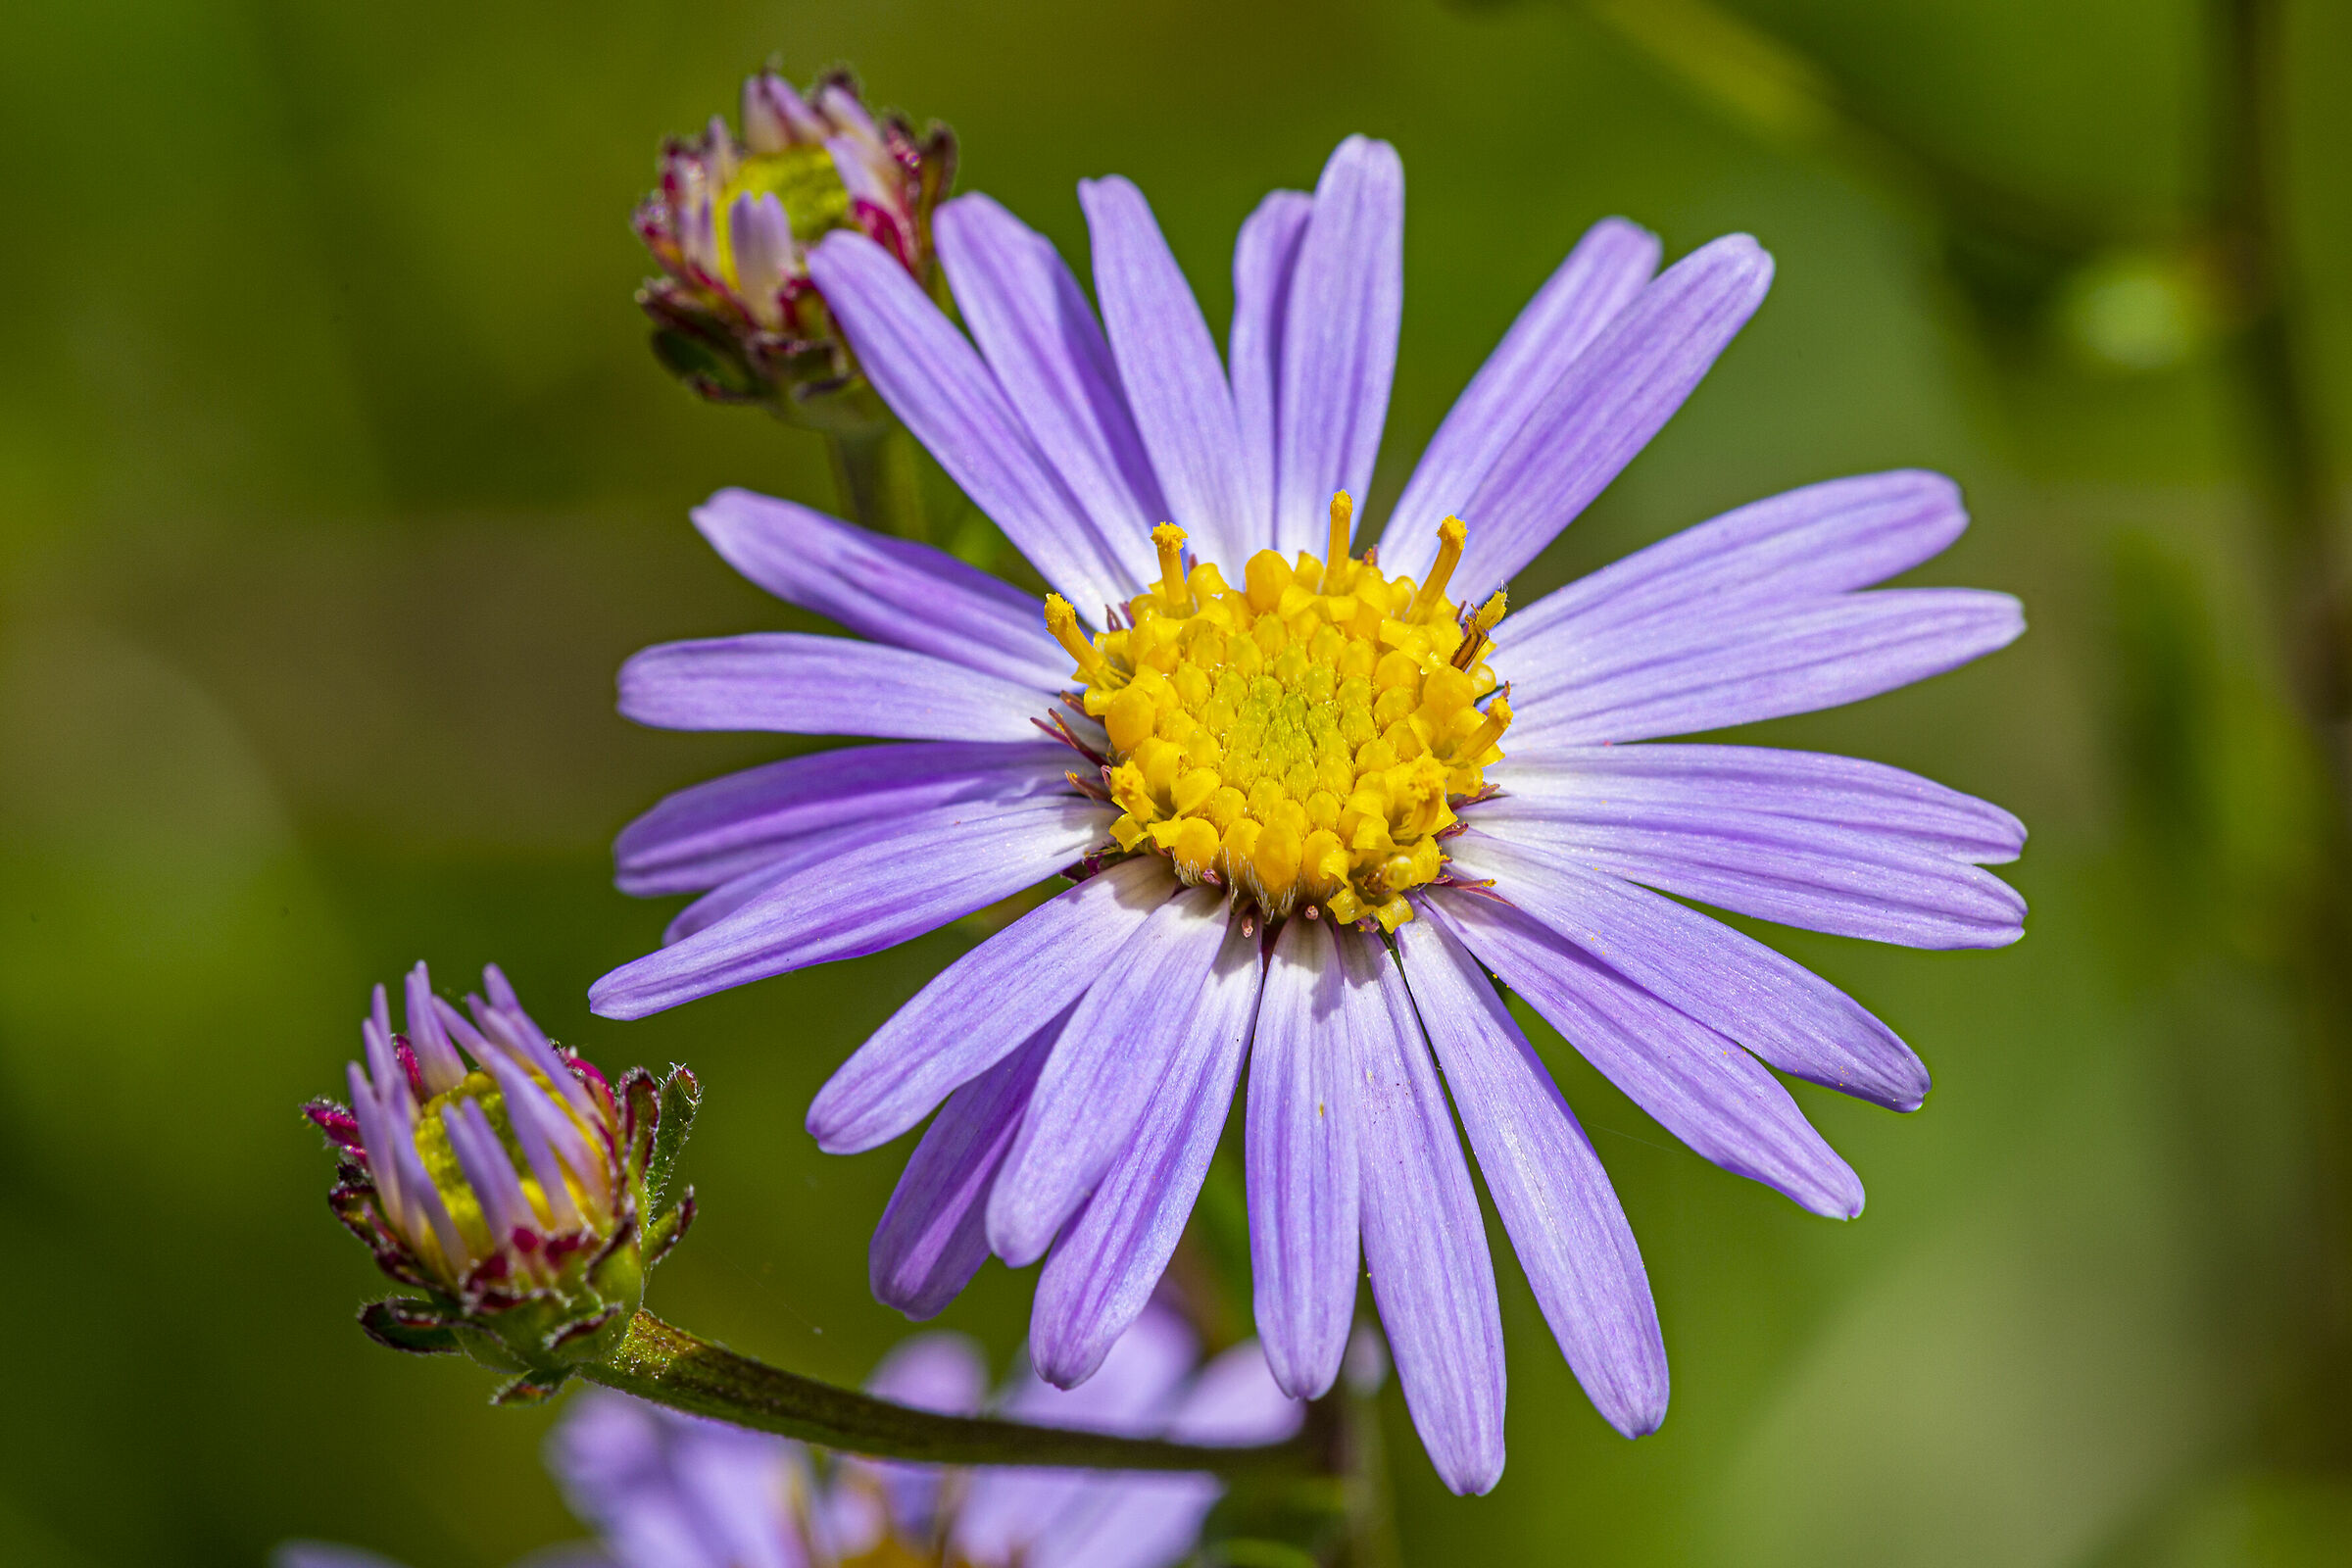 Aster...